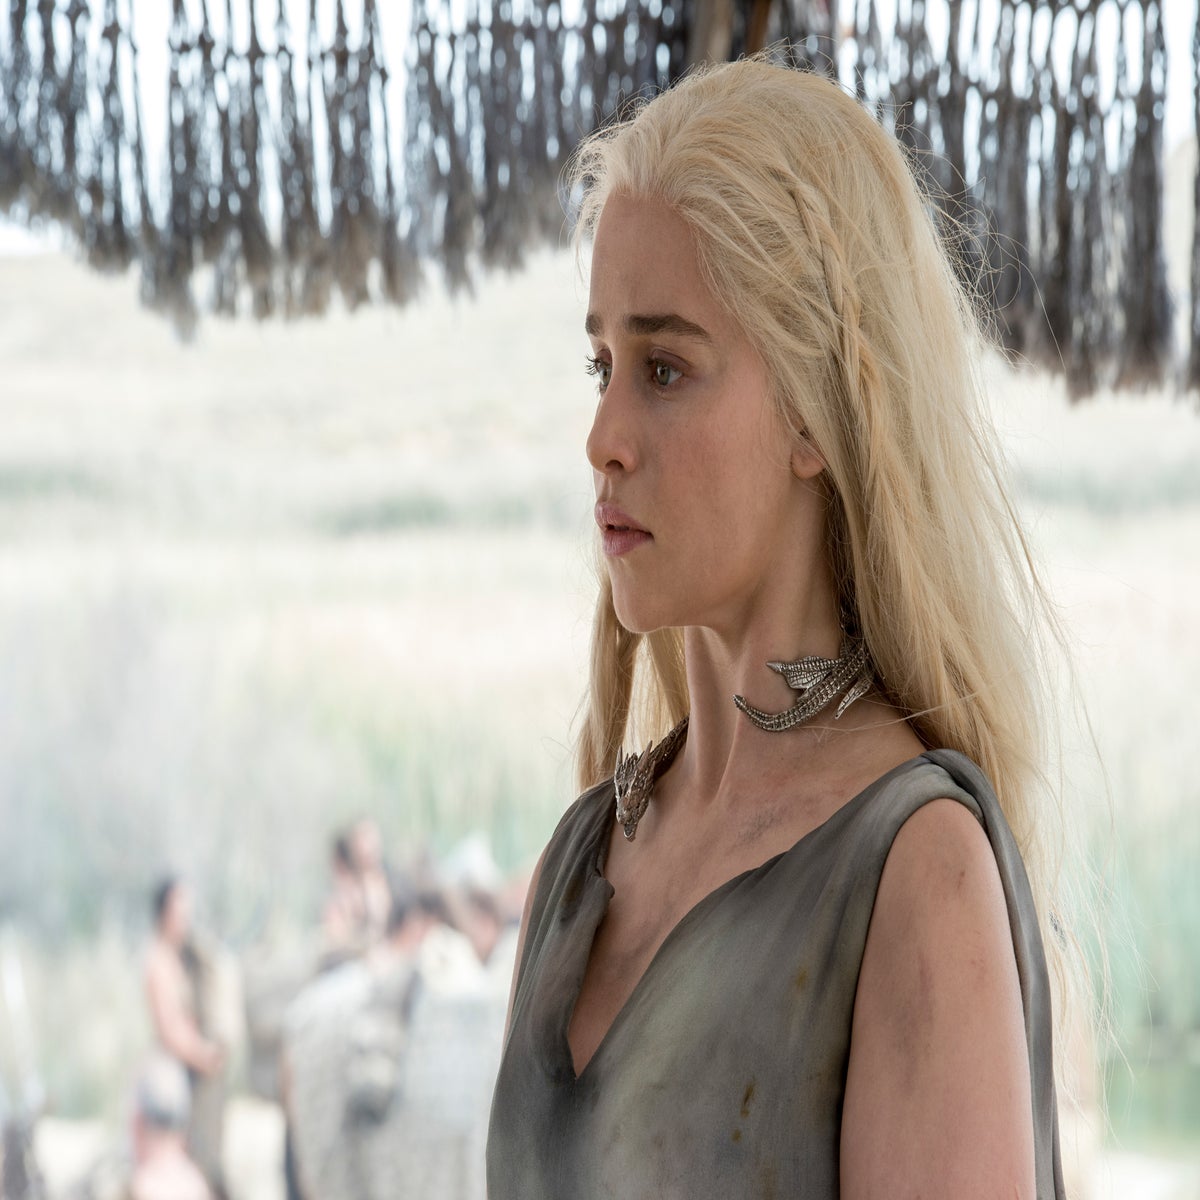 Emilia Clarke's awful Game of Thrones experience is proof that